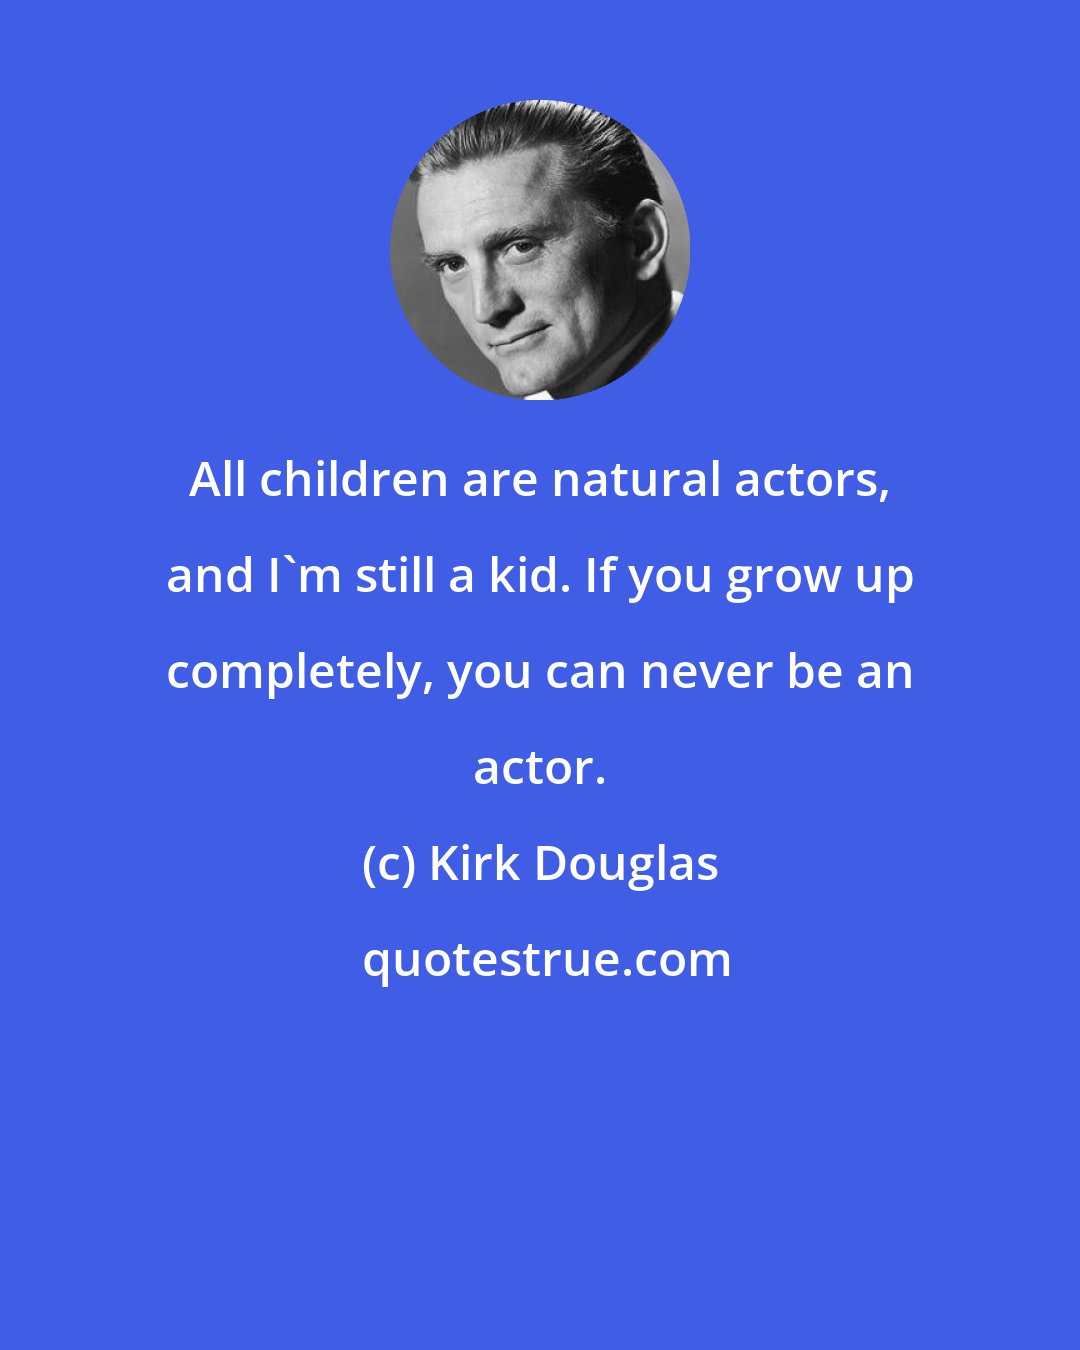 Kirk Douglas: All children are natural actors, and I'm still a kid. If you grow up completely, you can never be an actor.